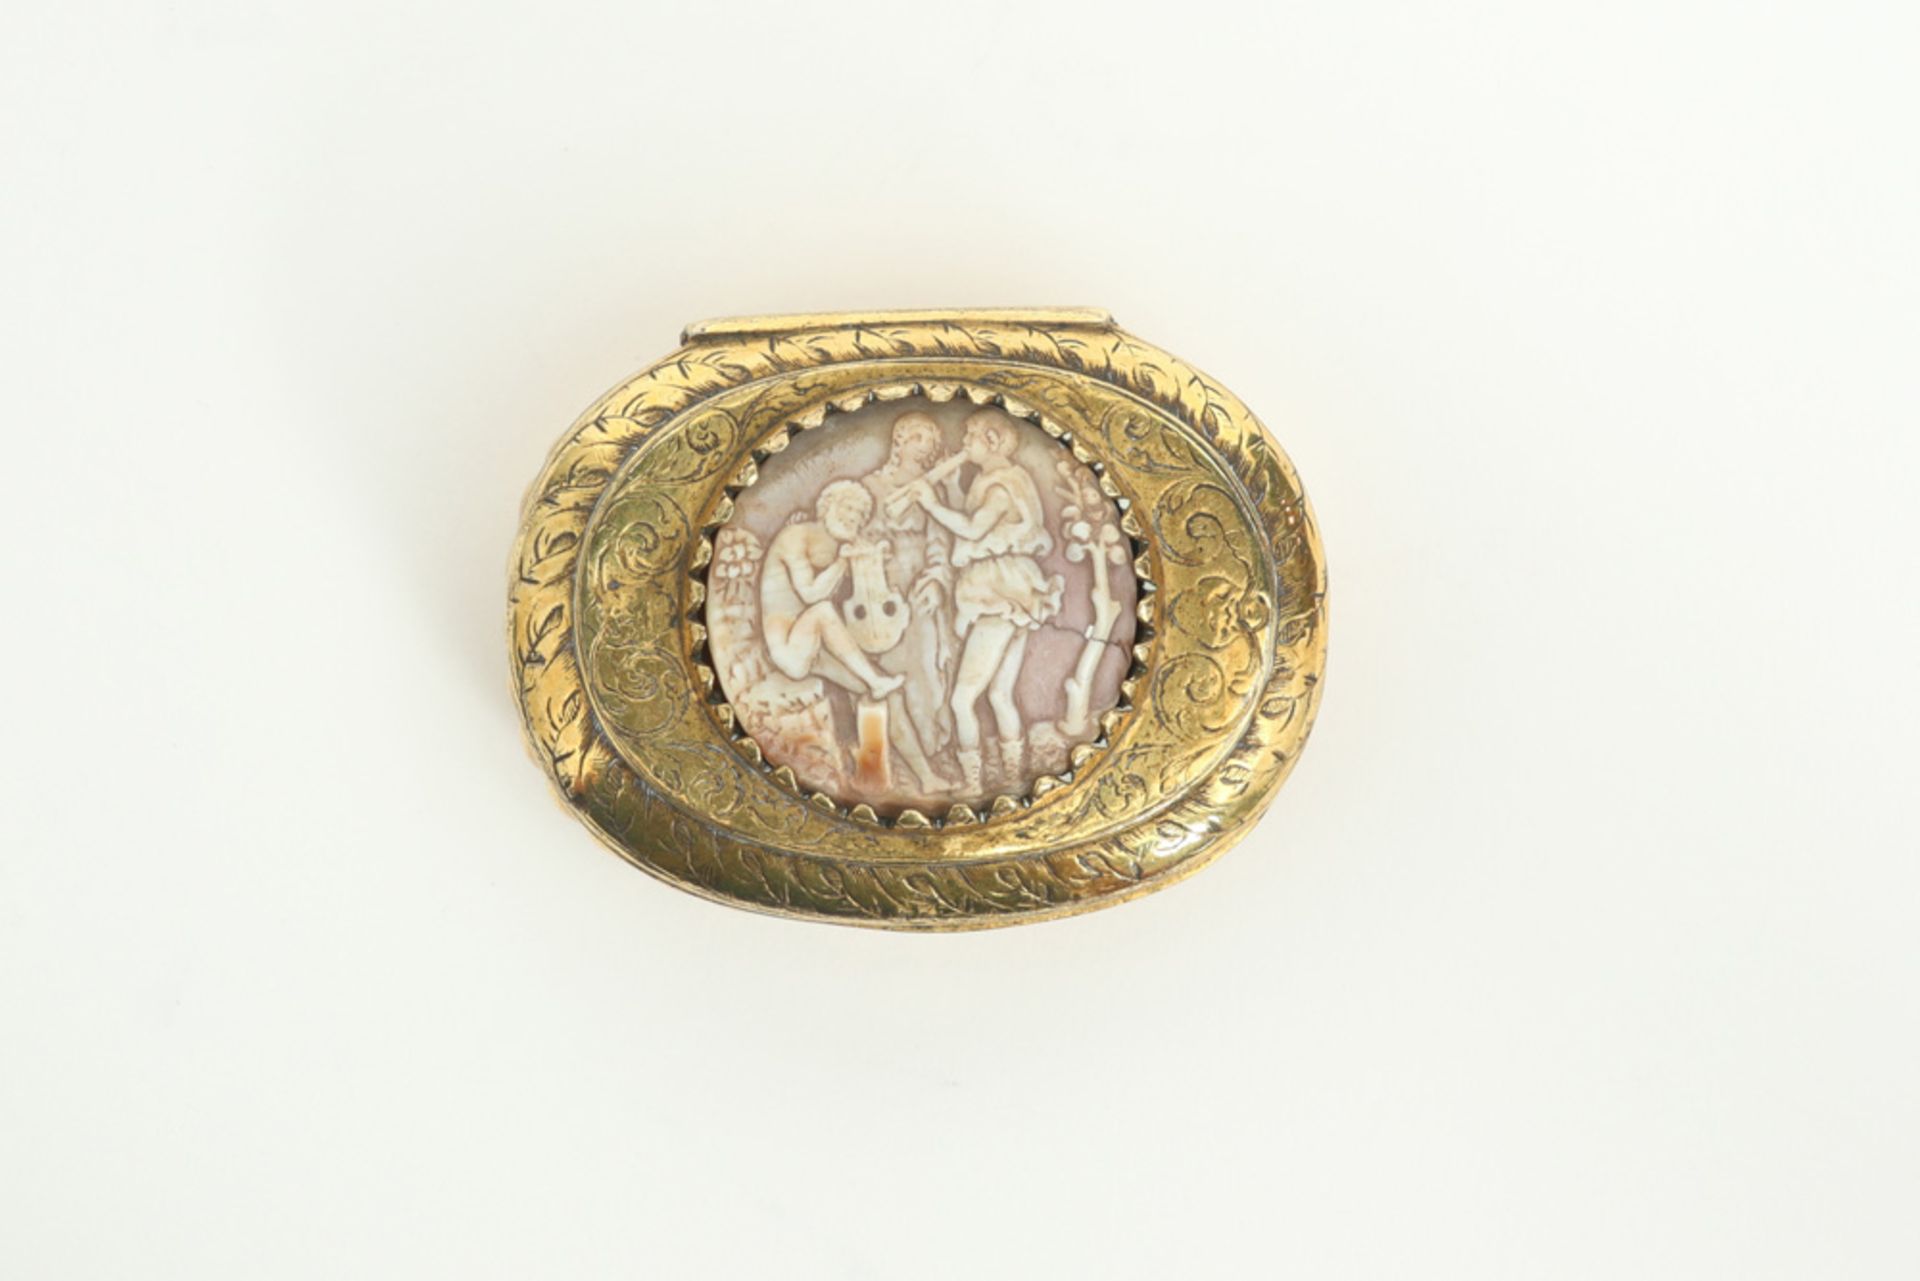 17th Cent. presumably German oval snuff box in vermeil with engraved and embossed ornamentation and  - Image 3 of 4